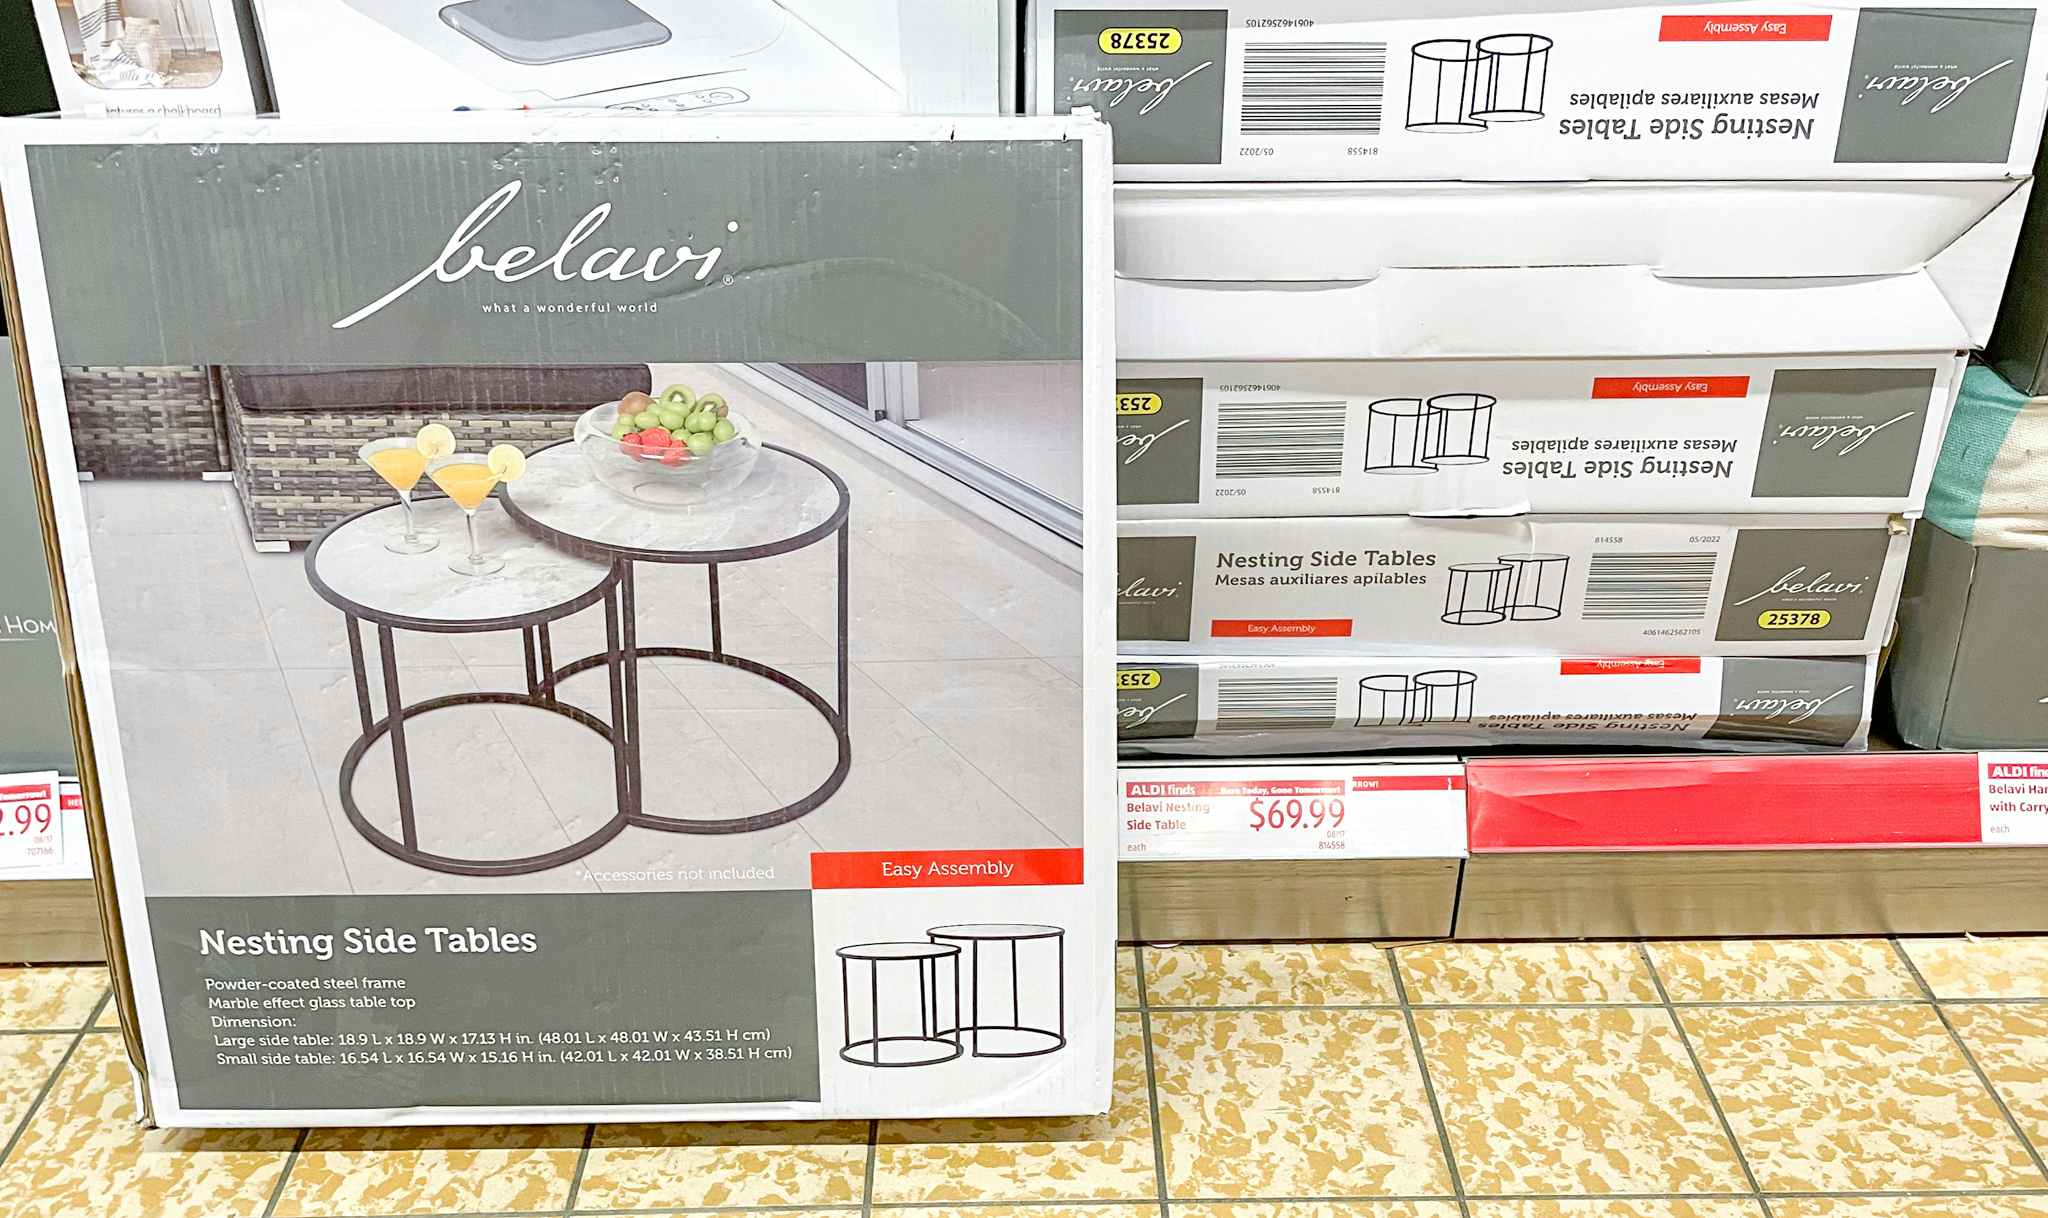 nesting side tables on the sale floor near the sale sign at aldi